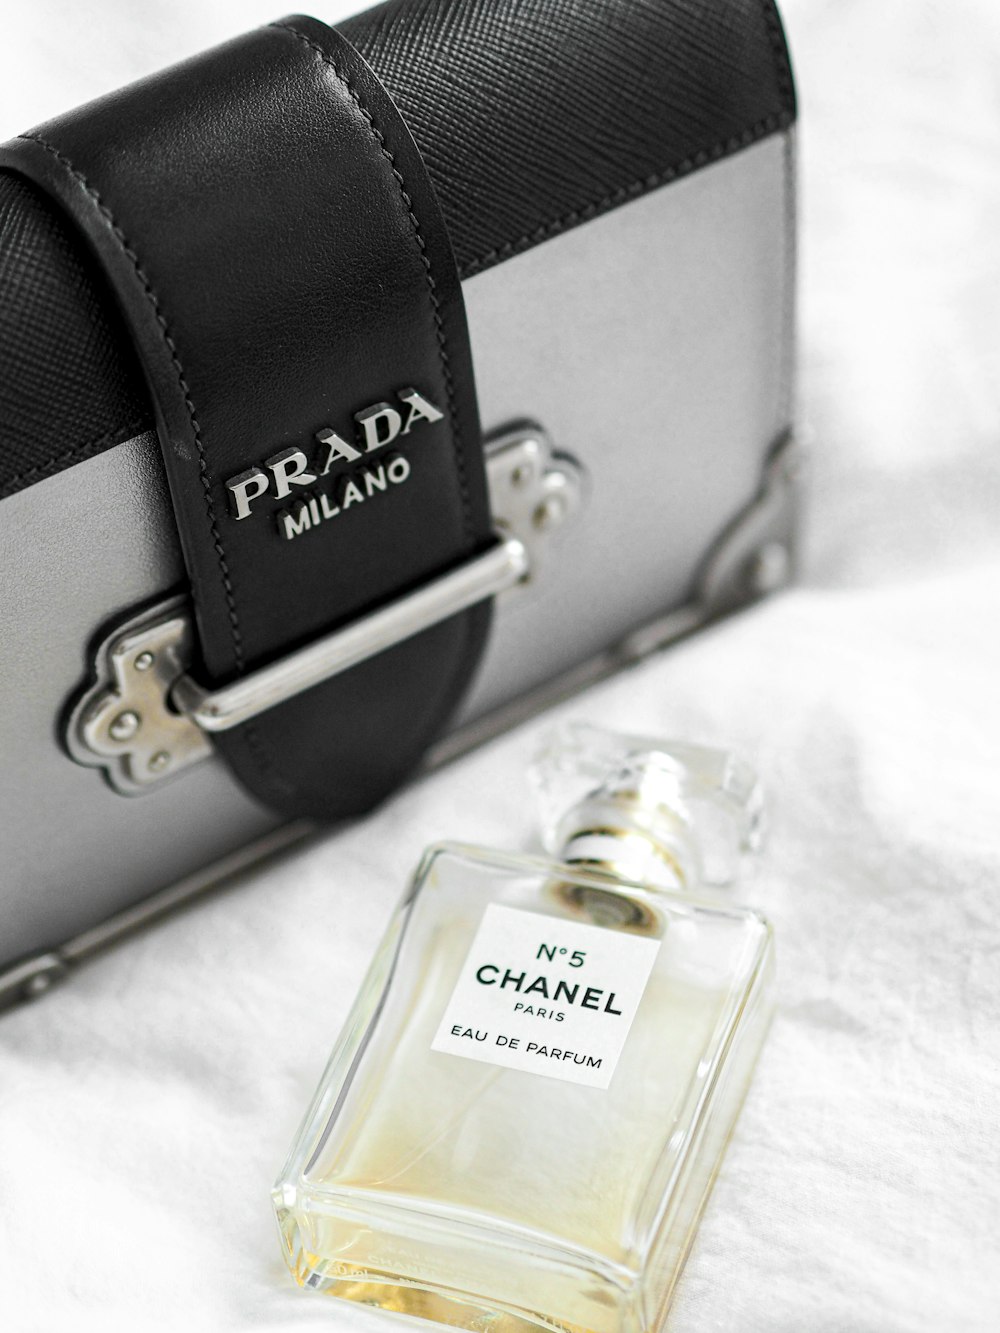 Clear glass perfume bottle beside black leather bag photo – Free